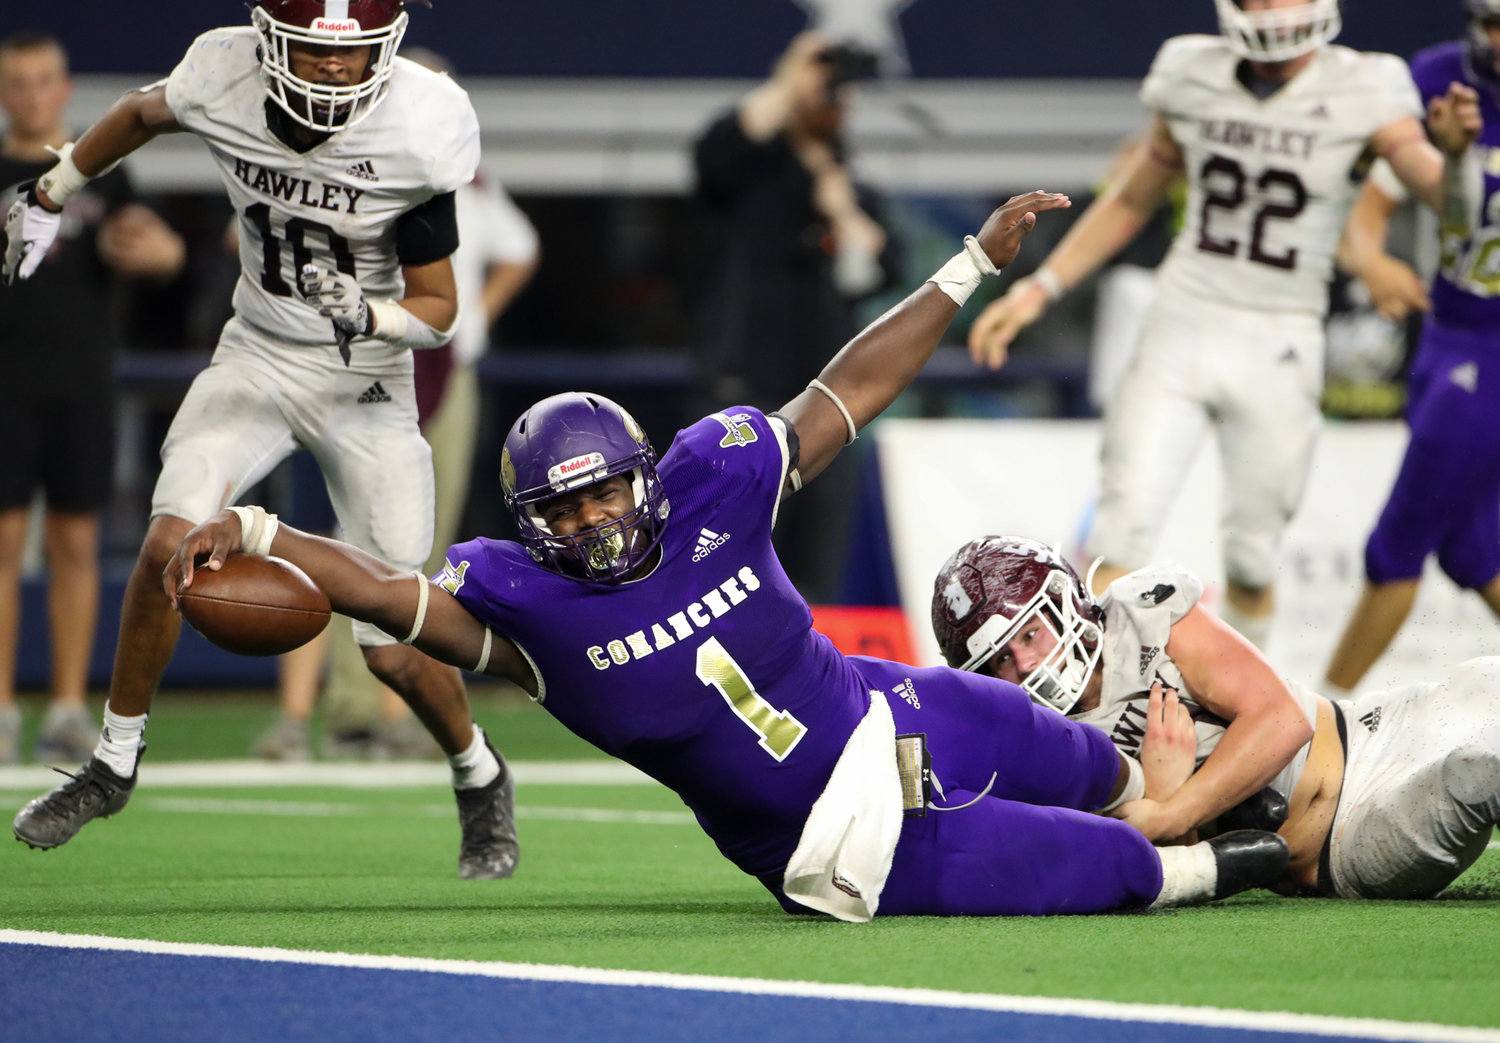 Shiner Comanches senior Doug Brooks (1) is ruled down short of the goal line during the Class 2A Division I state football championship game between Shiner and Hawley on December 15, 2021 in Arlington, Texas.